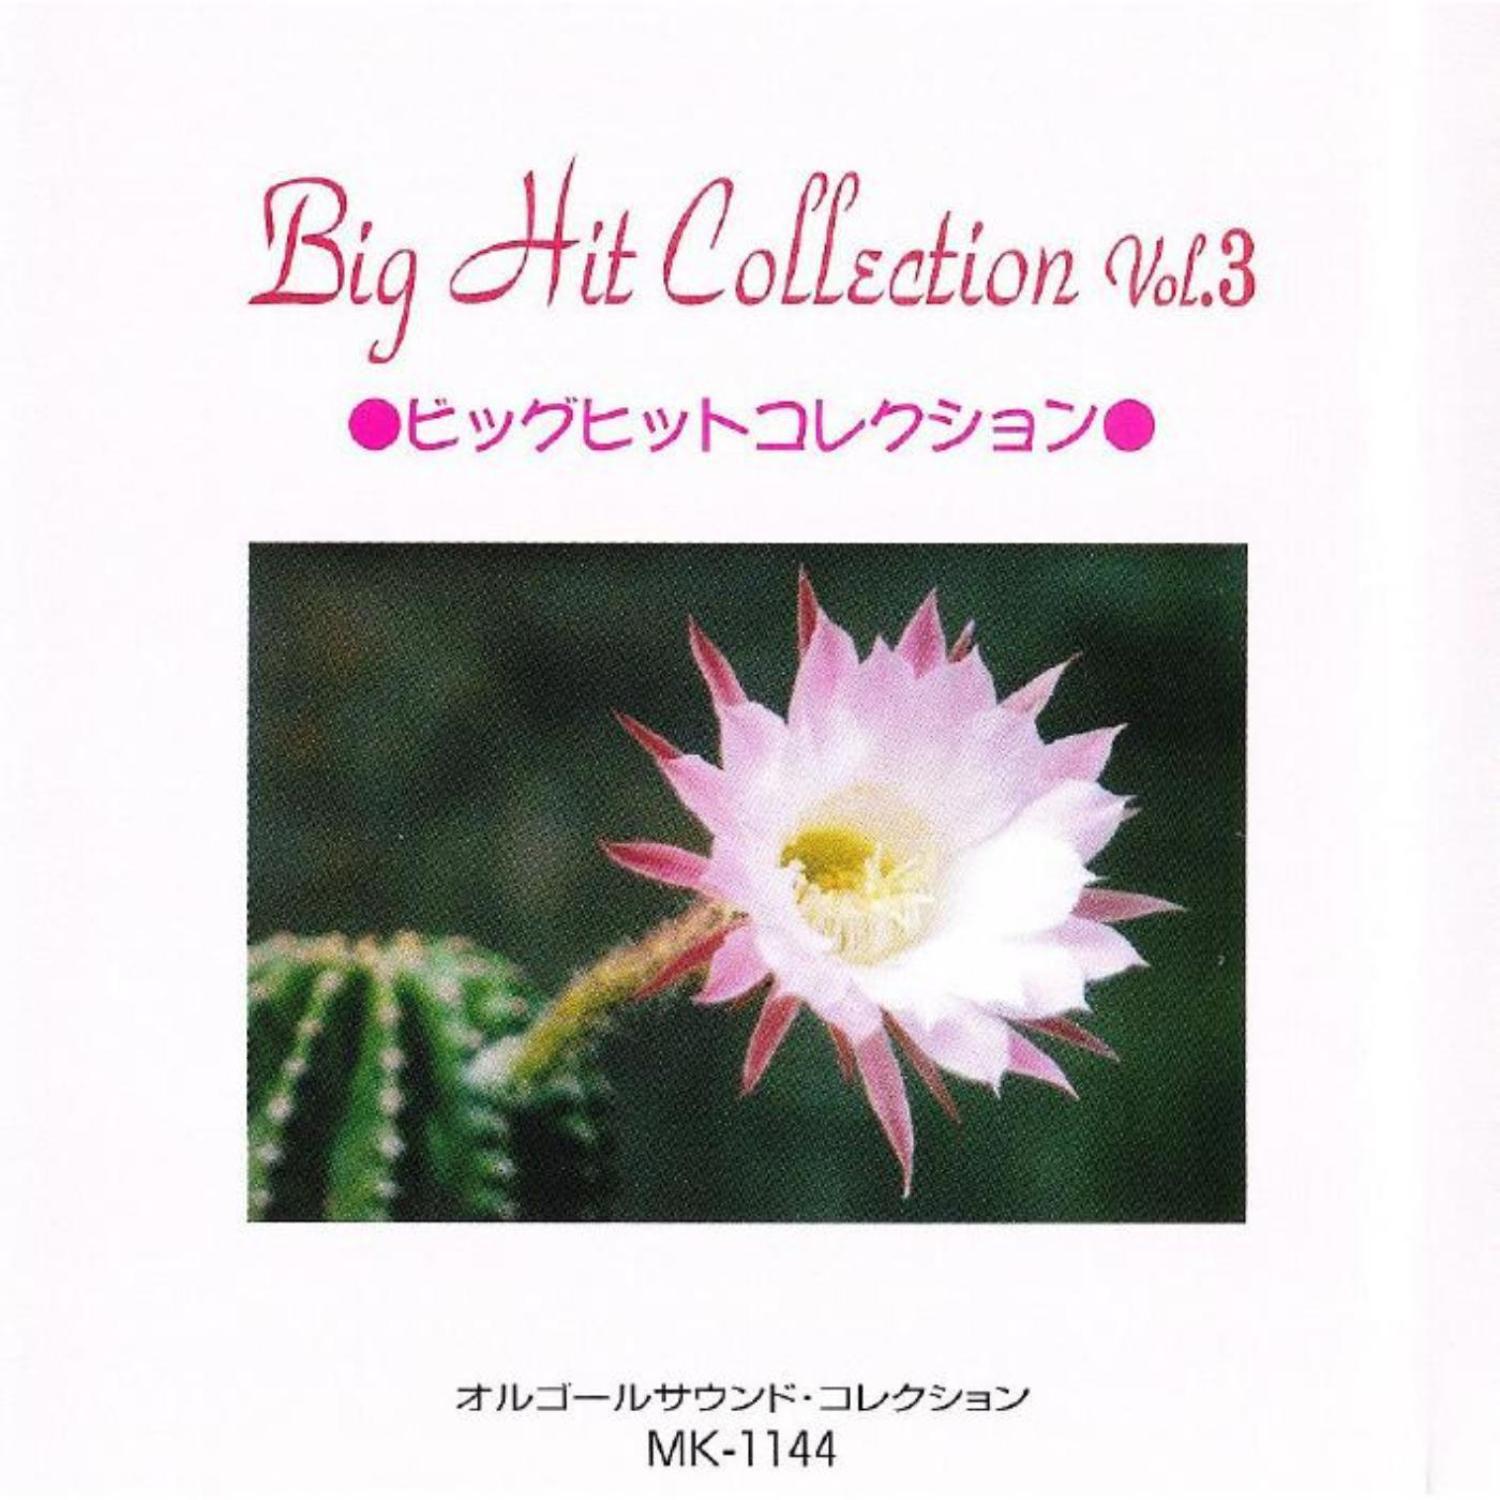 Big Hit Collection Vol 3